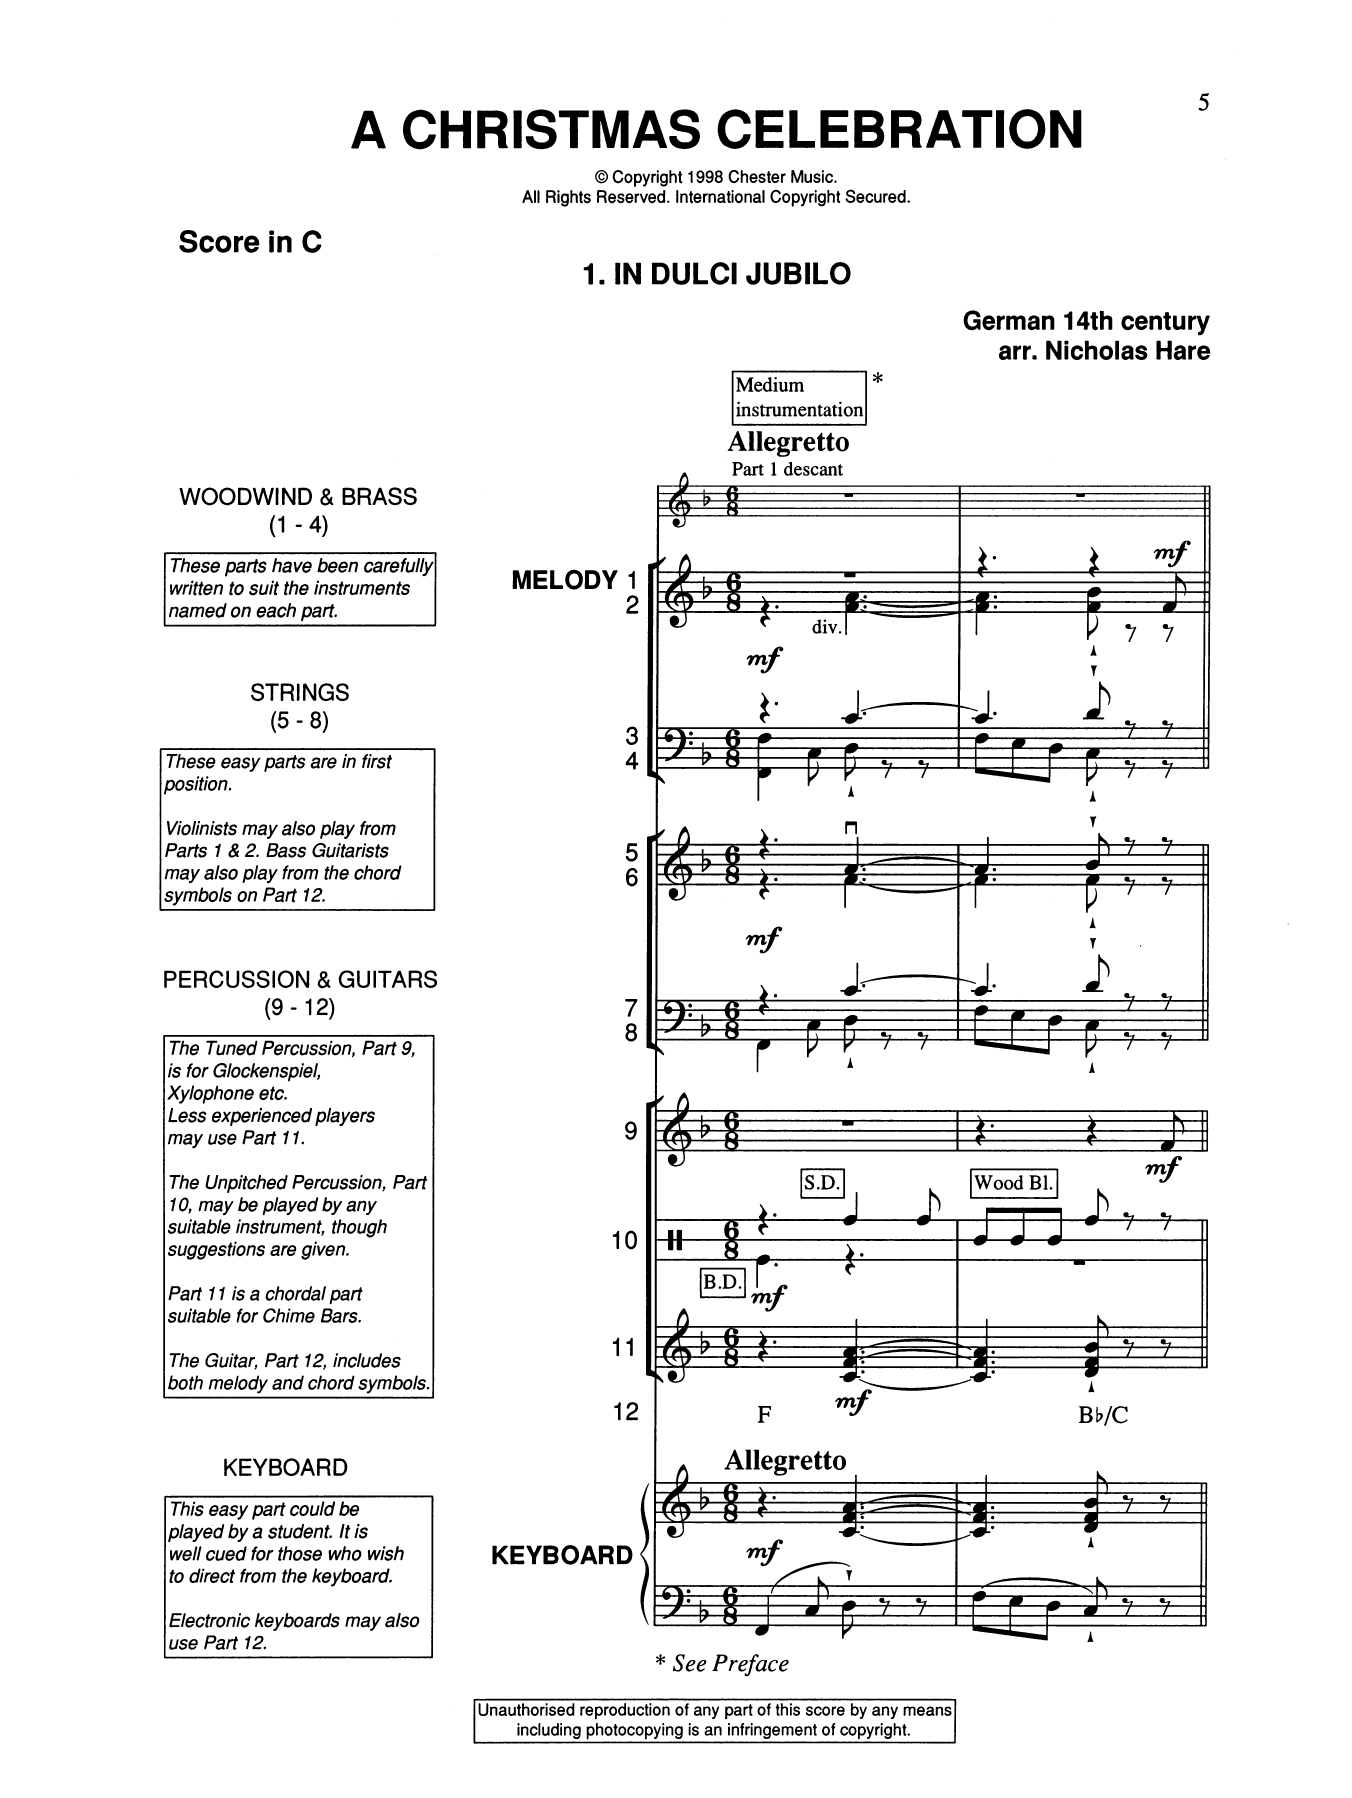 Download Traditional A Christmas Celebration Sheet Music